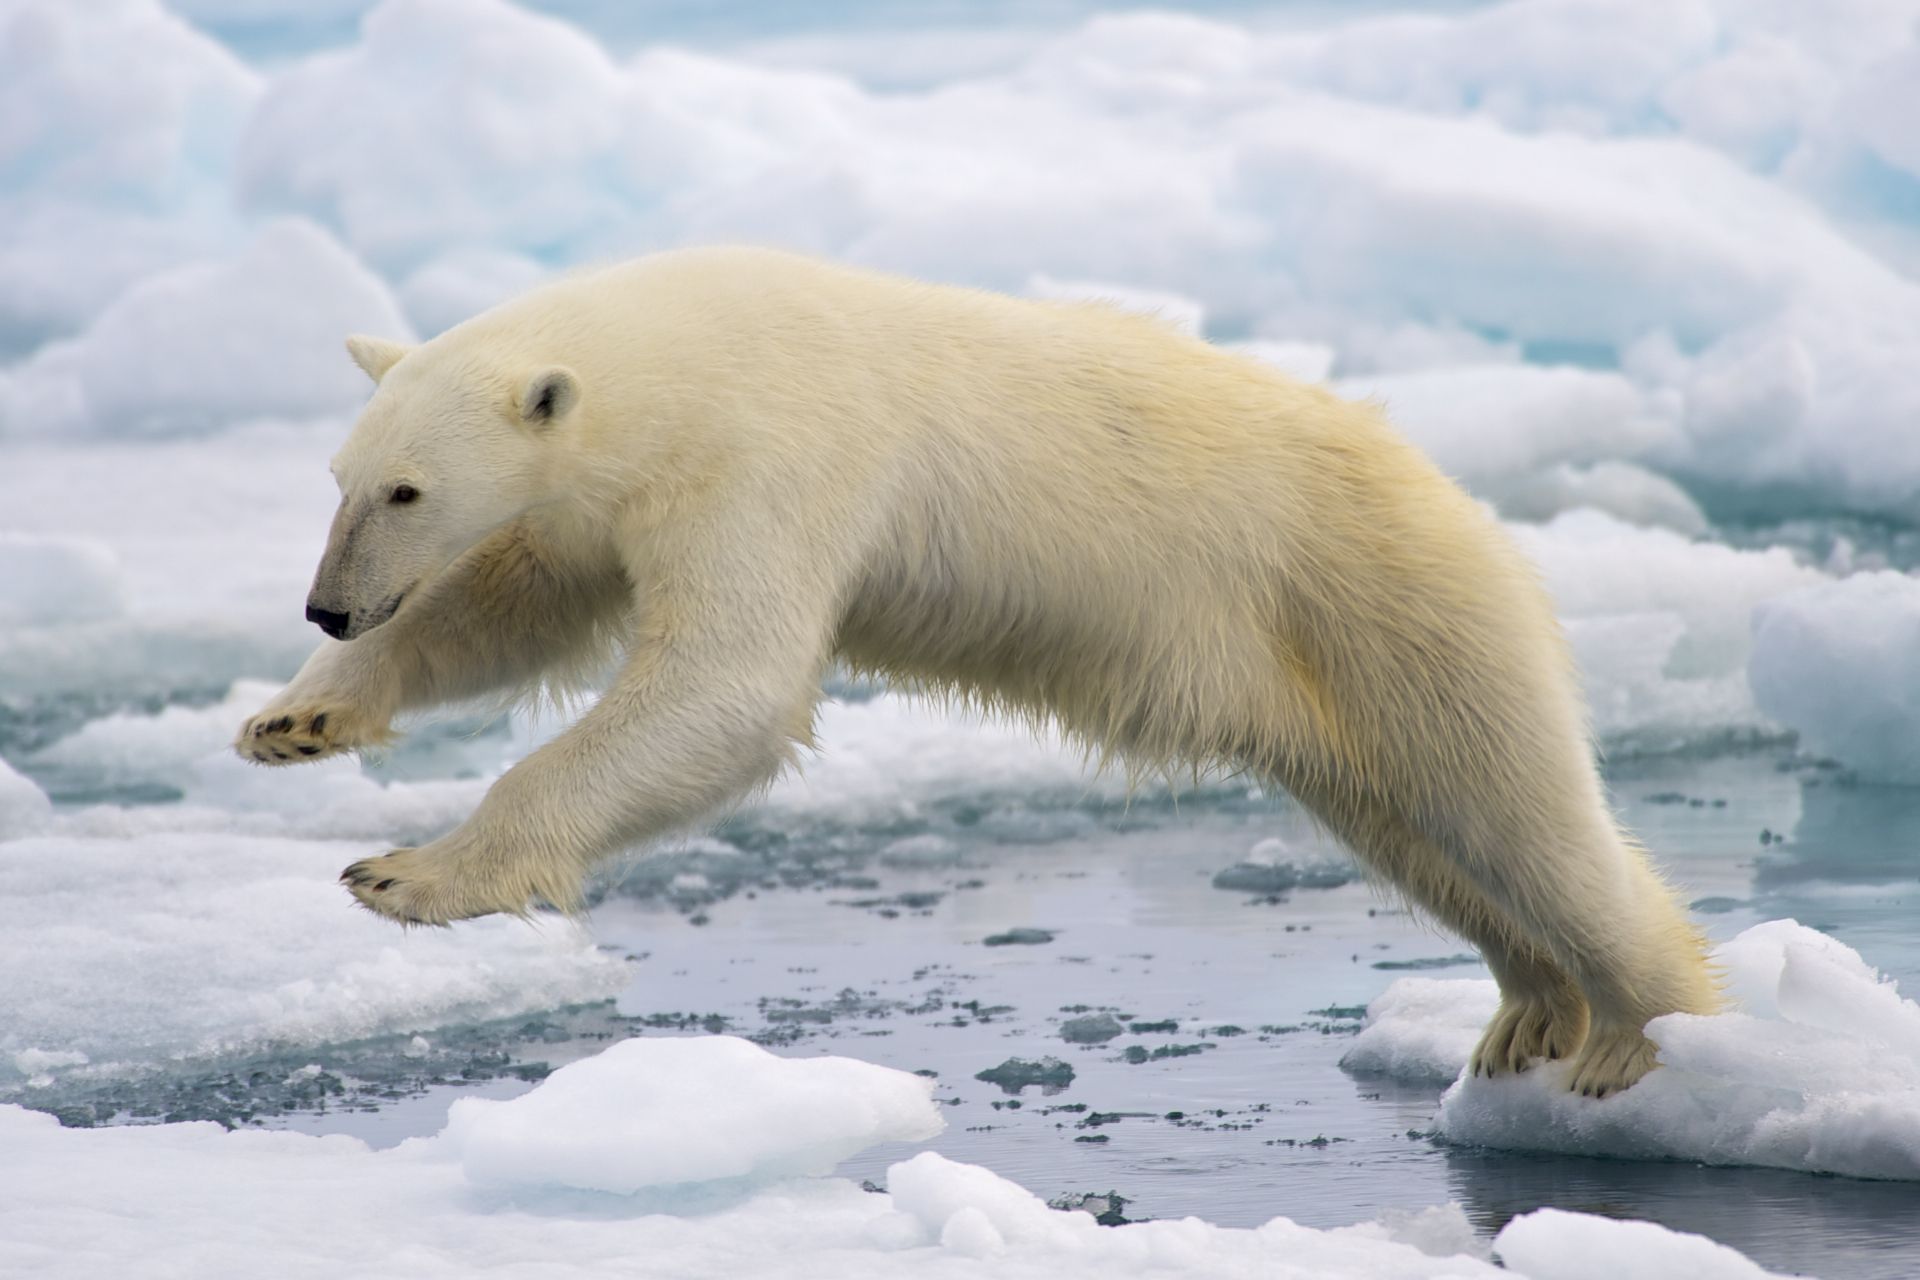 More polar bears in Greenland than expected - The Post – The Post